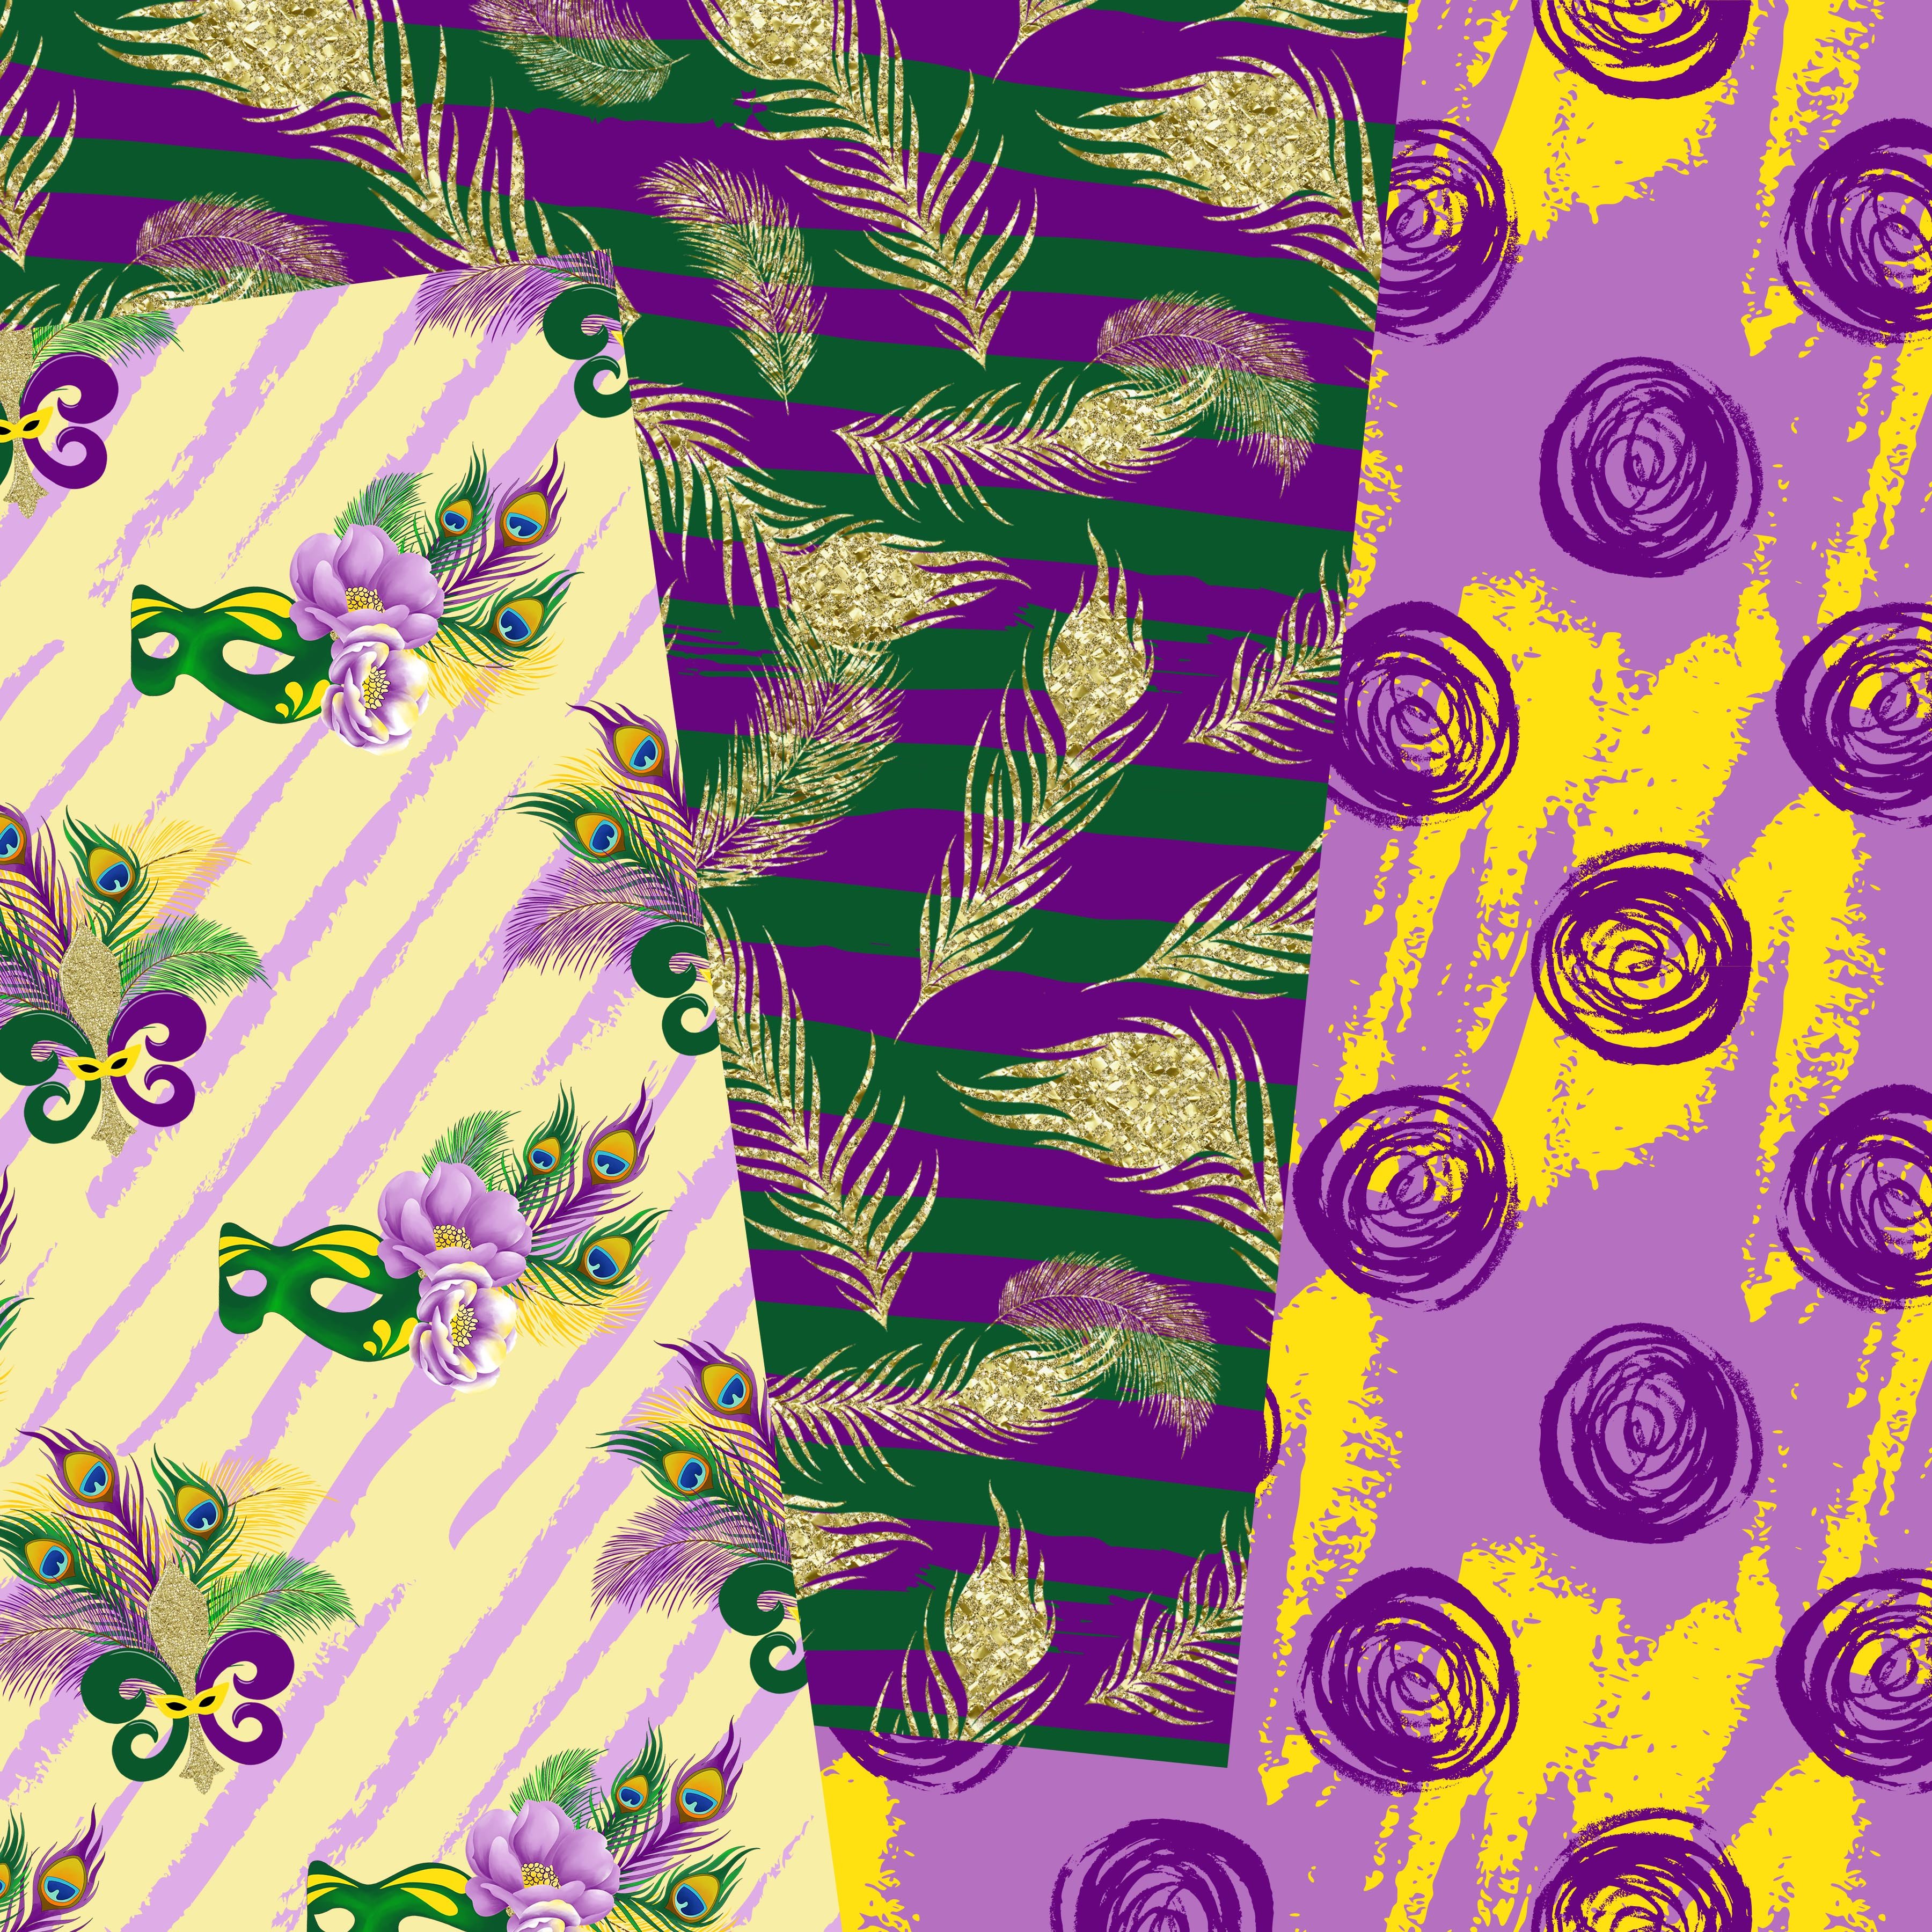 Some super colorful patterns with magic mardi gras print.